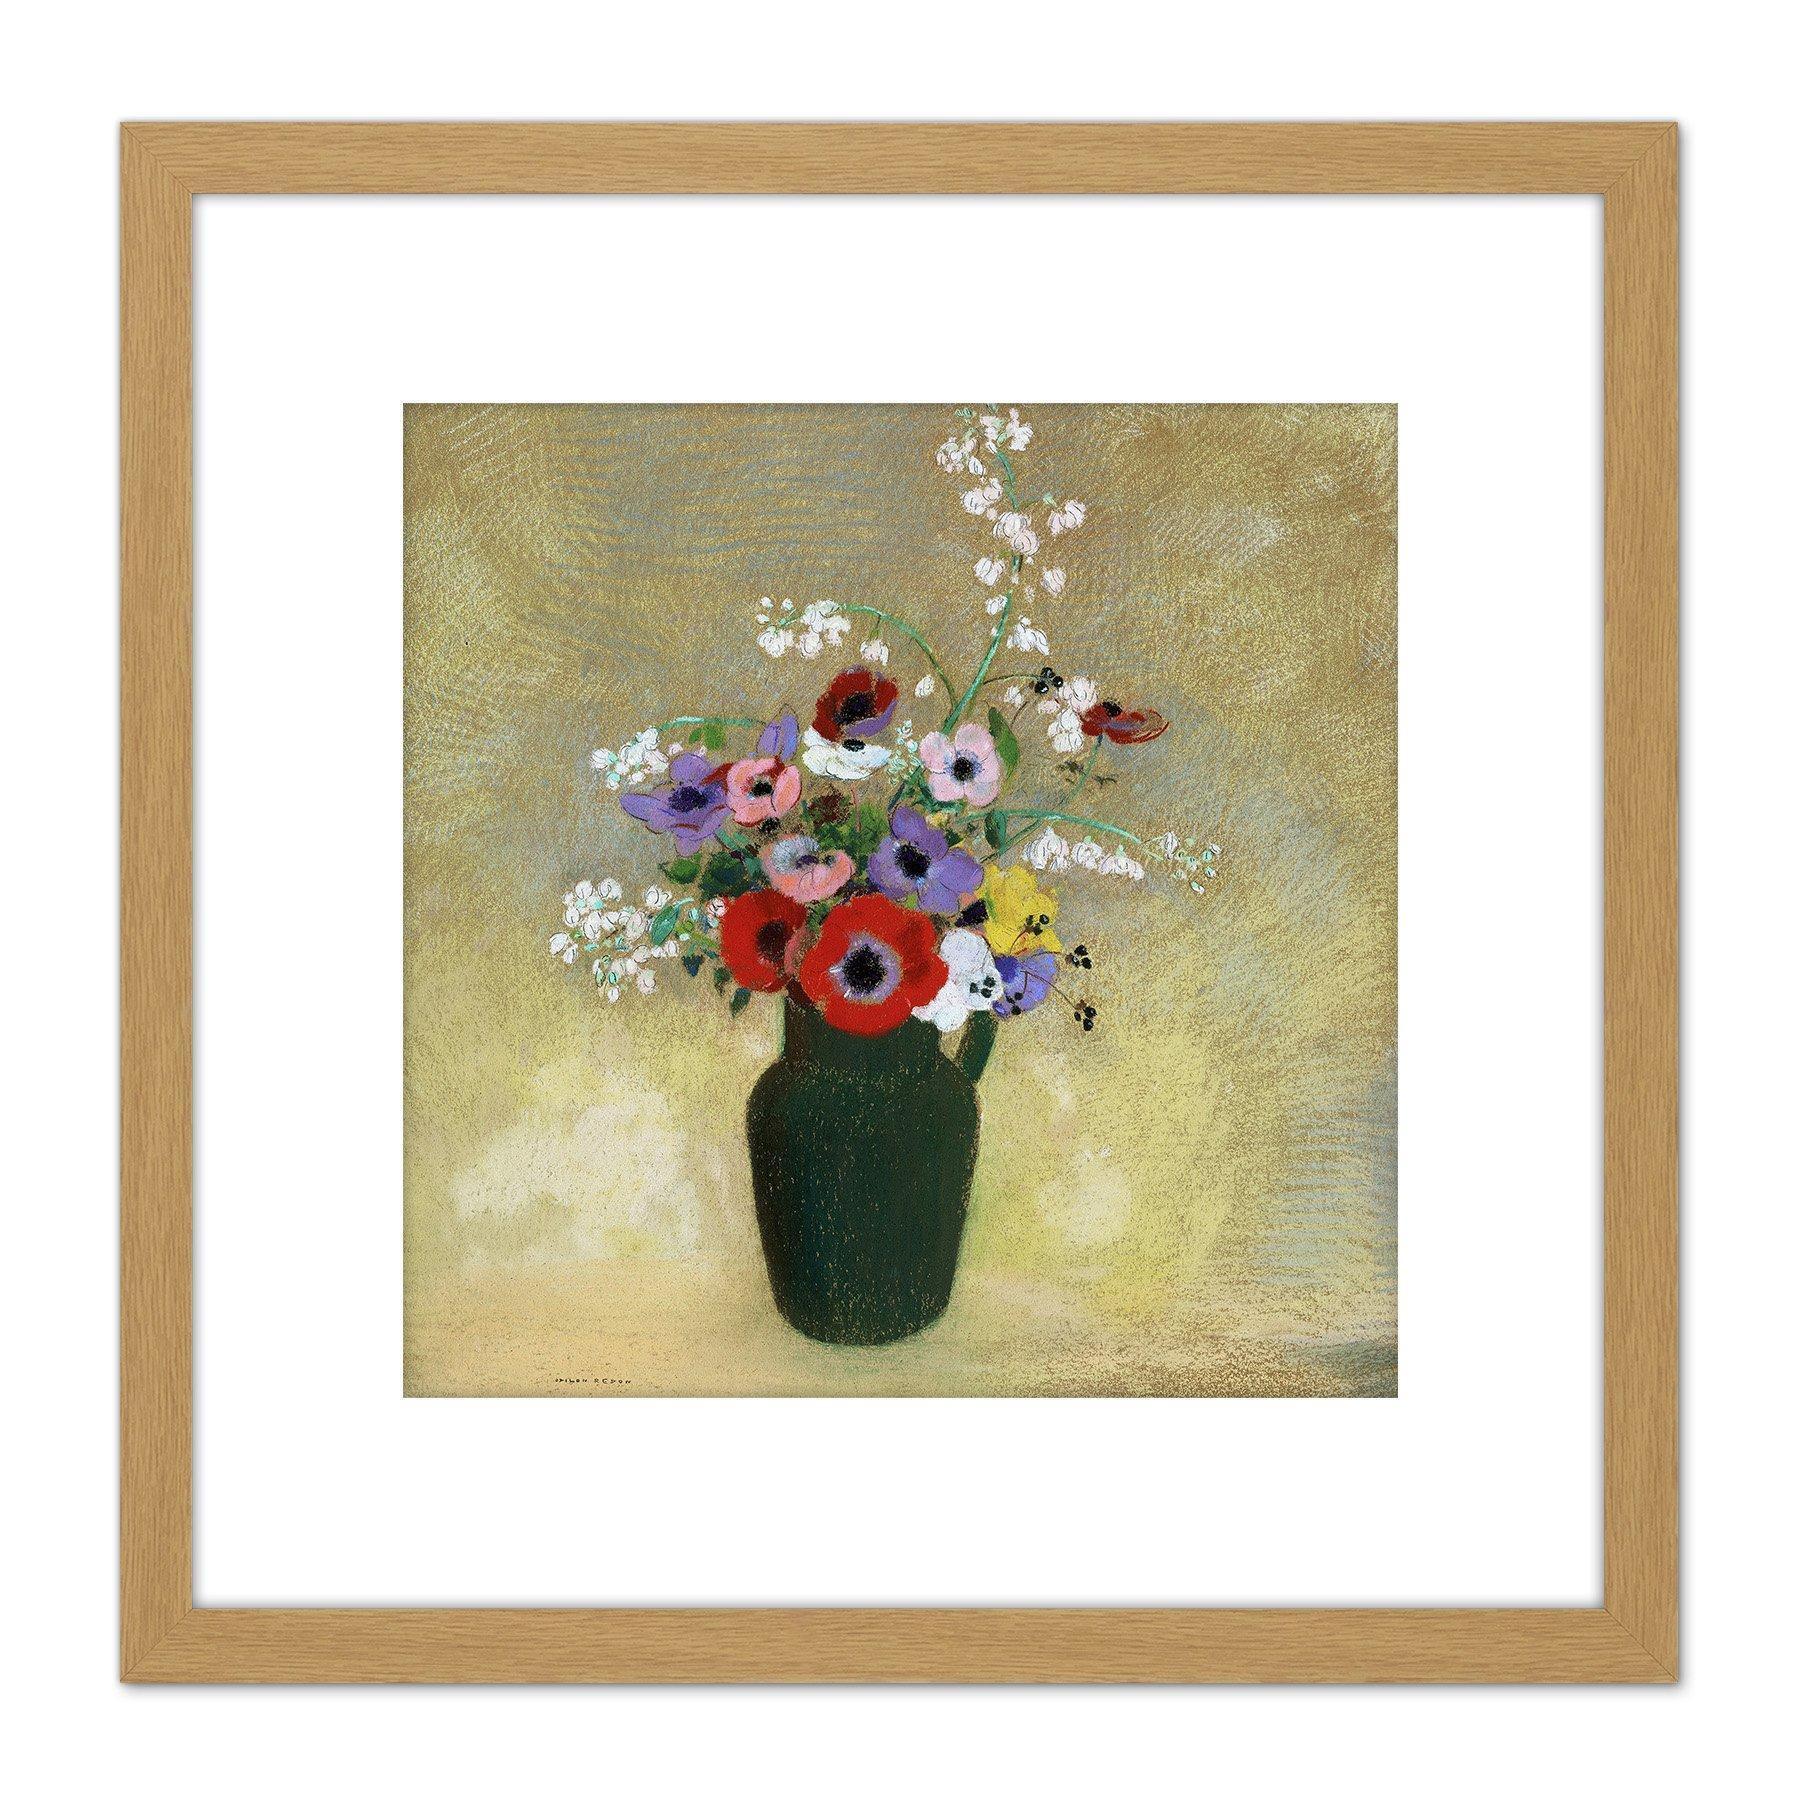 Odilon Redon Large Green Vase With Mixed Flowers 8X8 Inch Square Wooden Framed Wall Art Print Picture with Mount - image 1